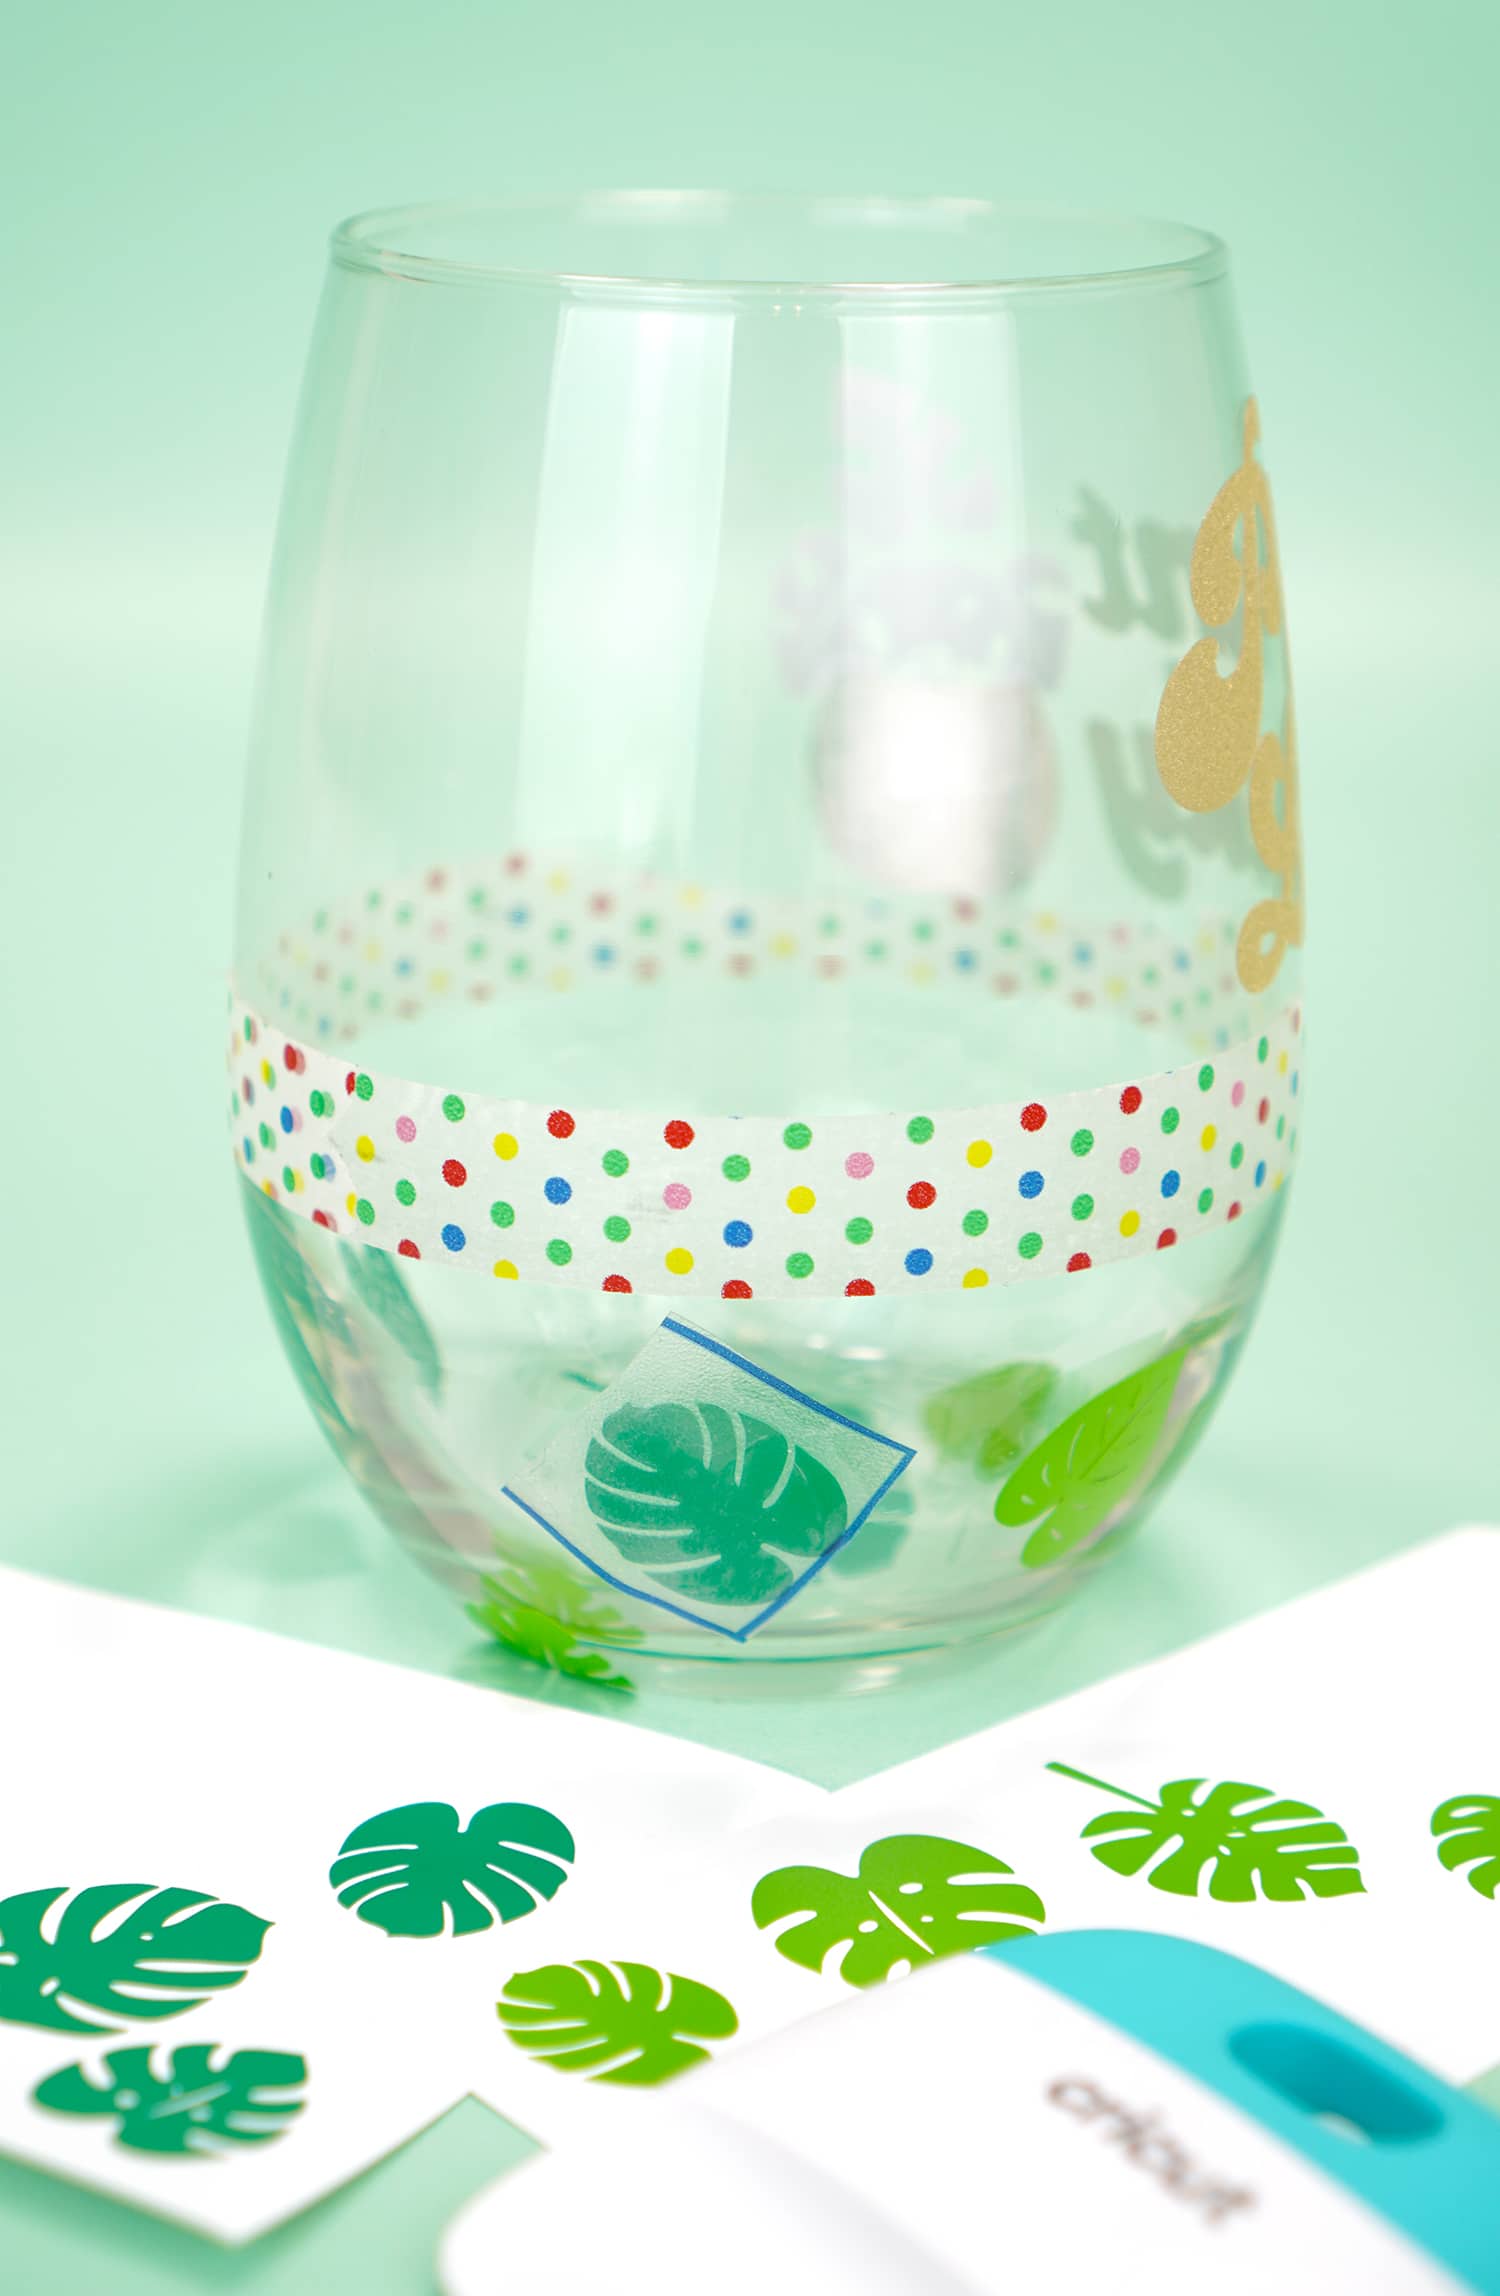 Clear stemless wine glass with band of washi tape and green vinyl leaf decals applied to bottom half of glass